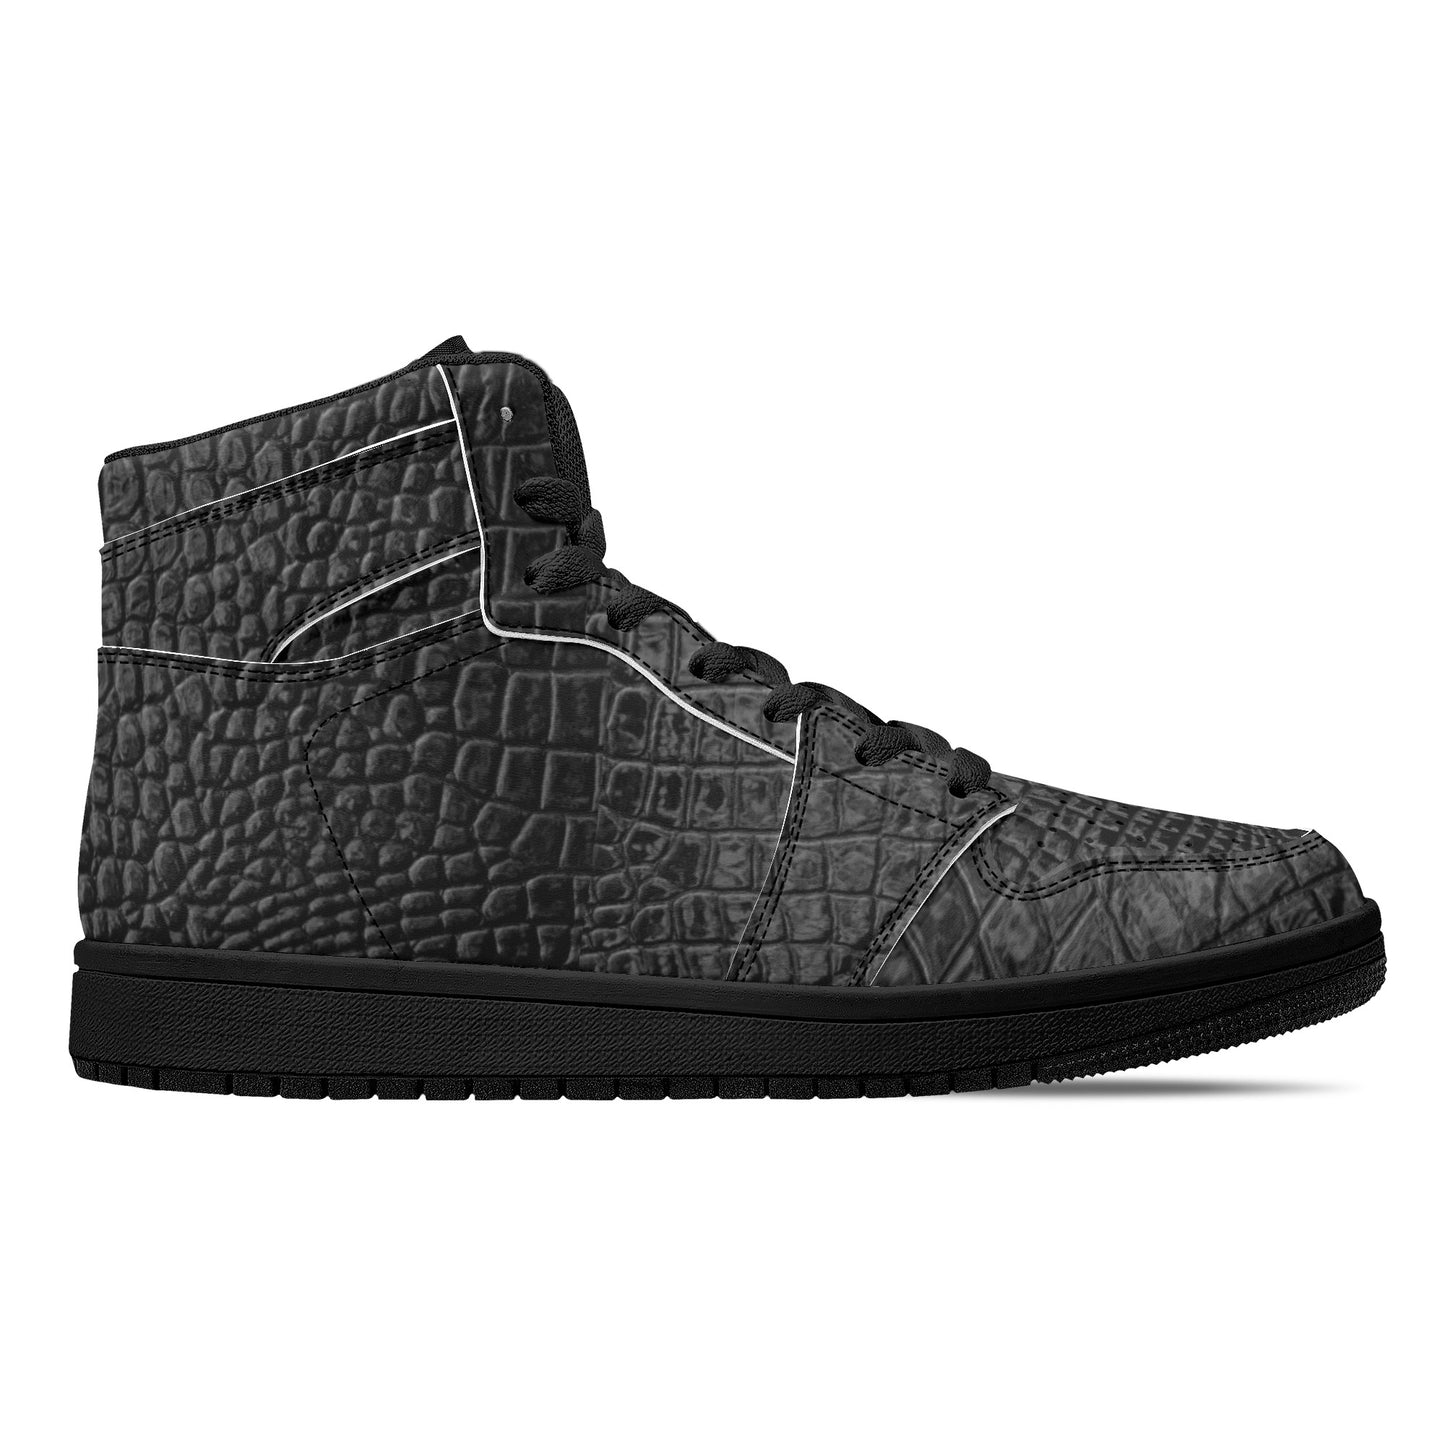 Women's Black High Top Leather Sneakers